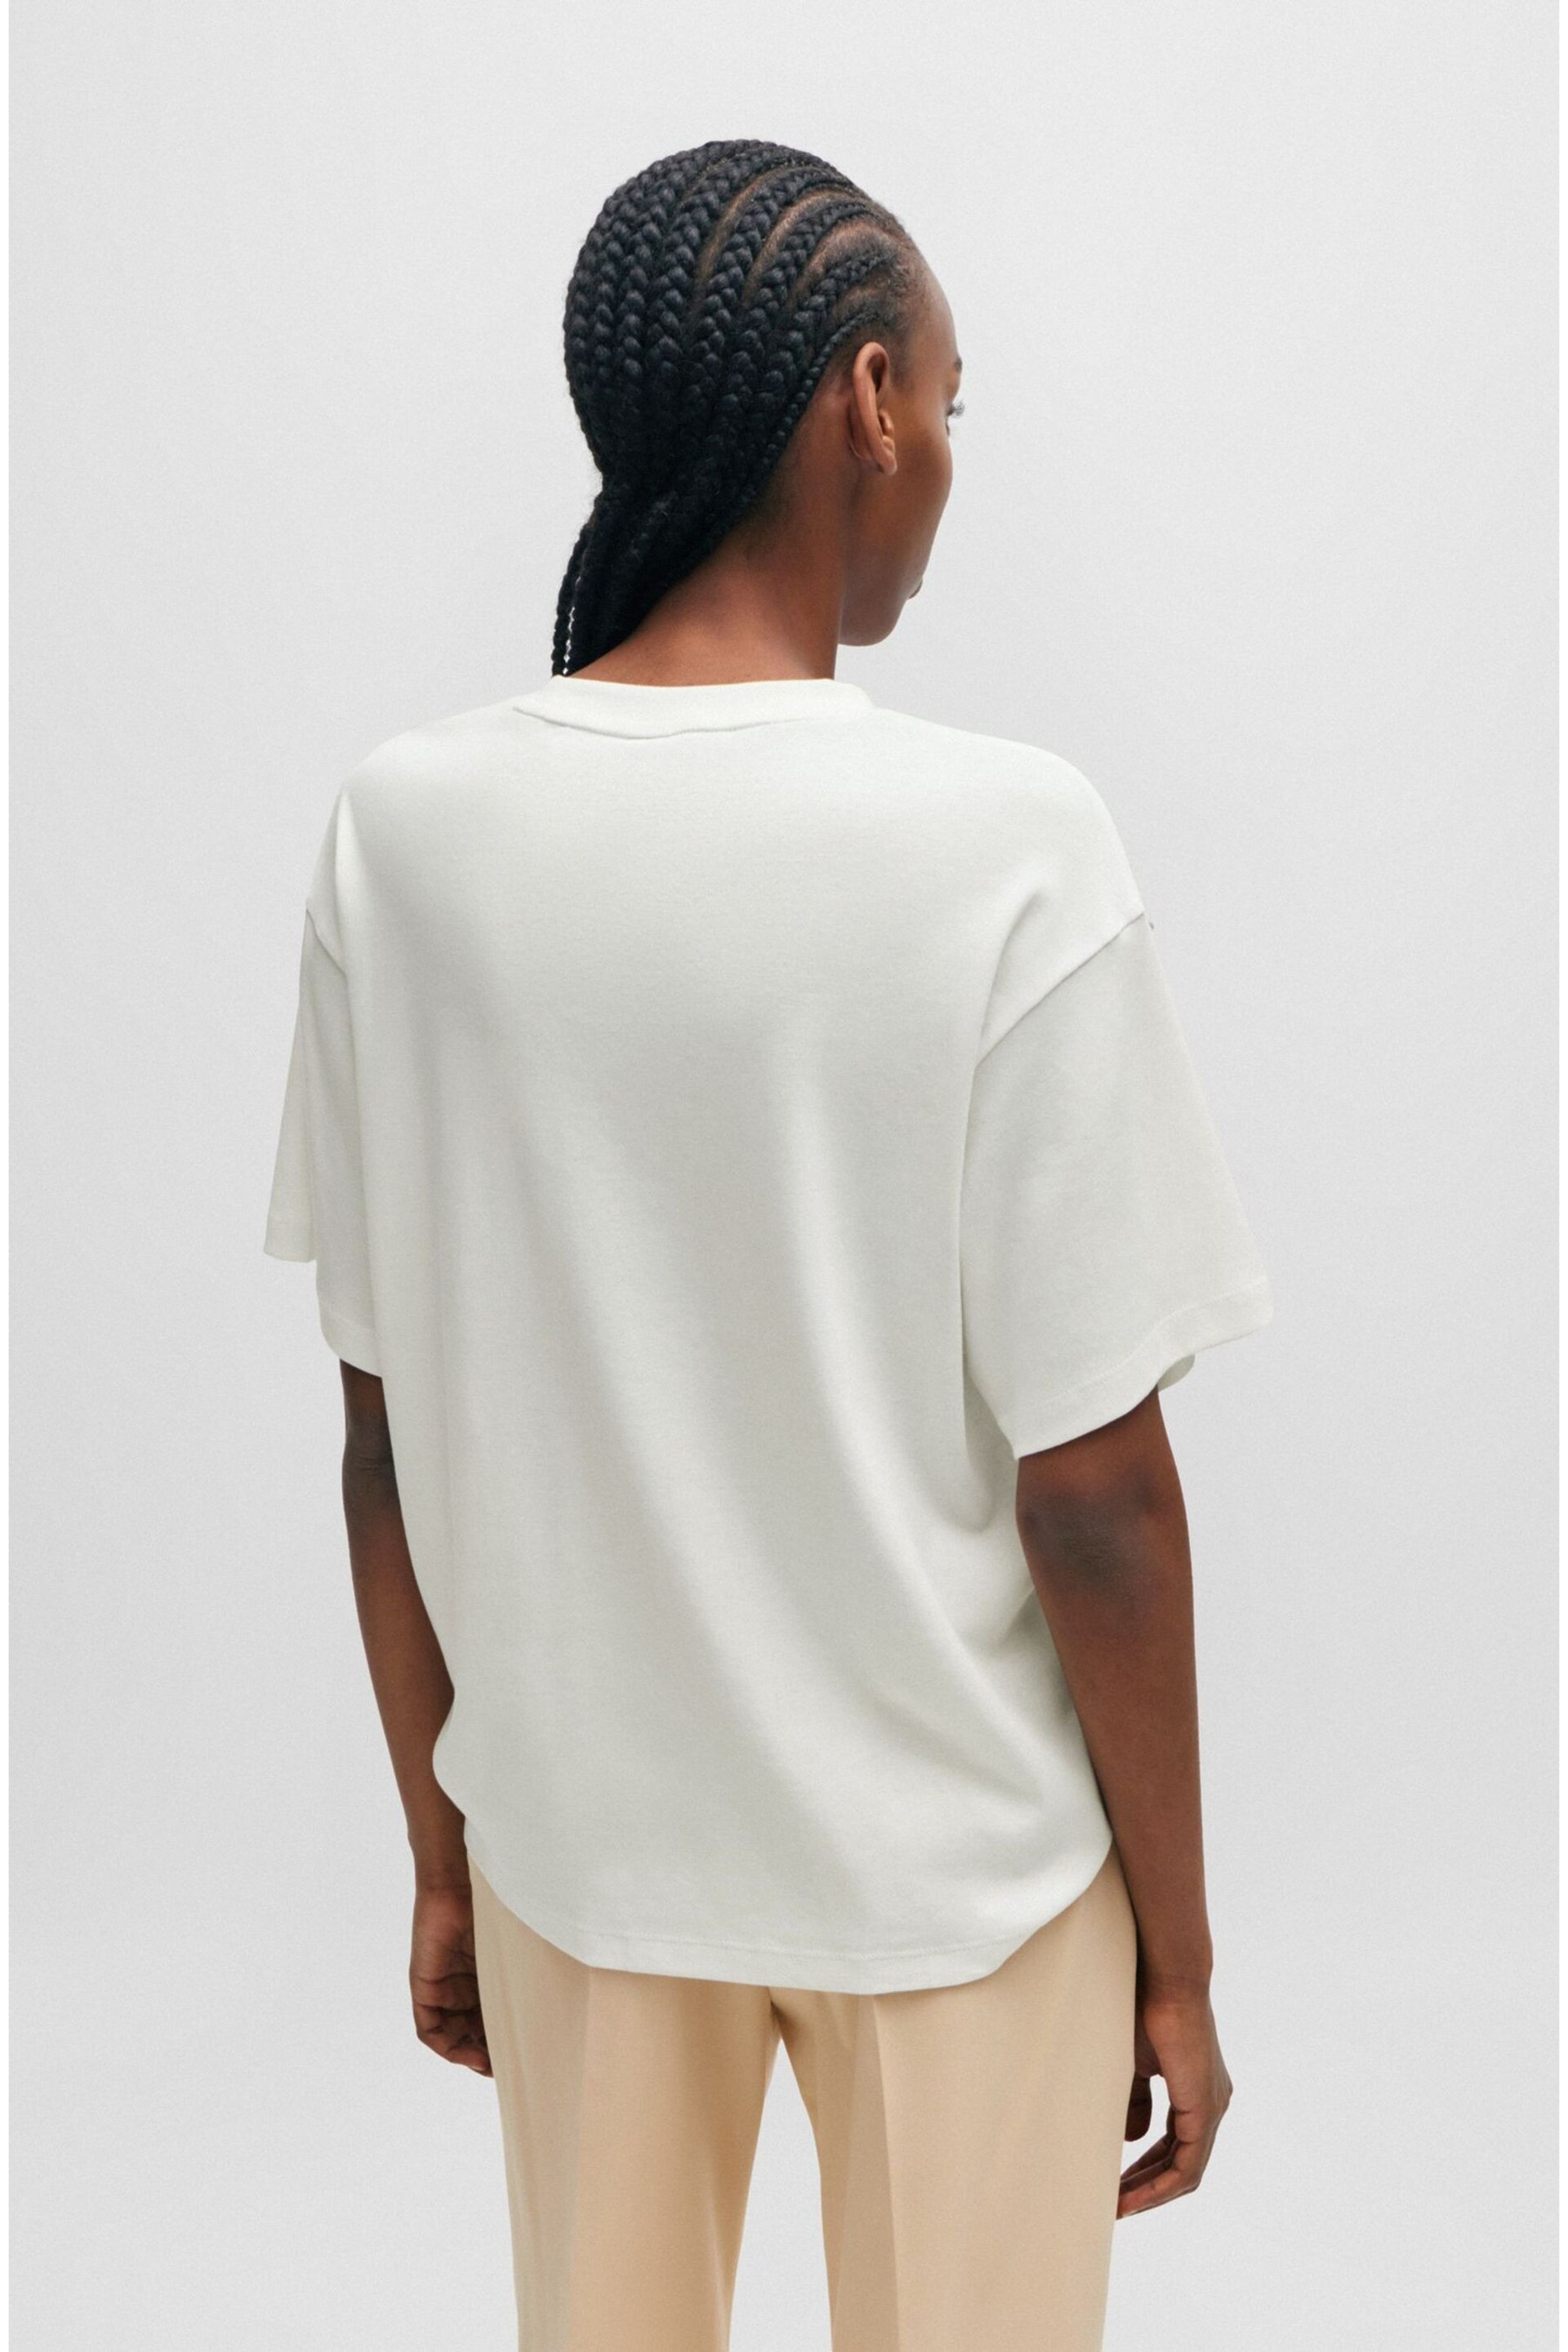 HUGO Cream Relaxed Fit Logo T-Shirt - Image 2 of 4